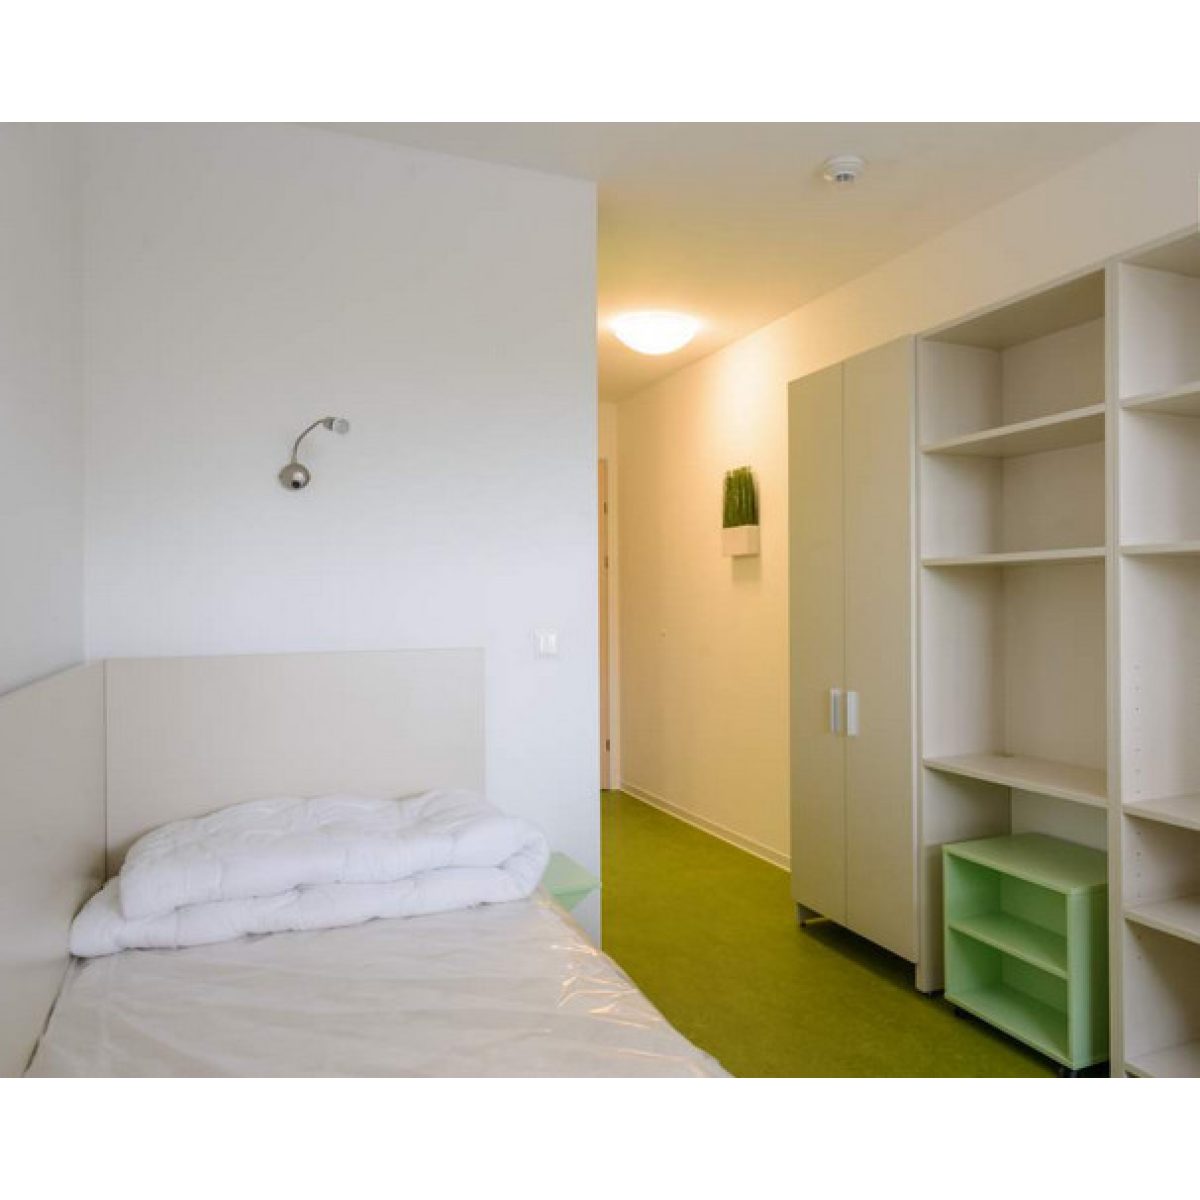 Single studio with private bathroom and Kitchenette (students only) 2